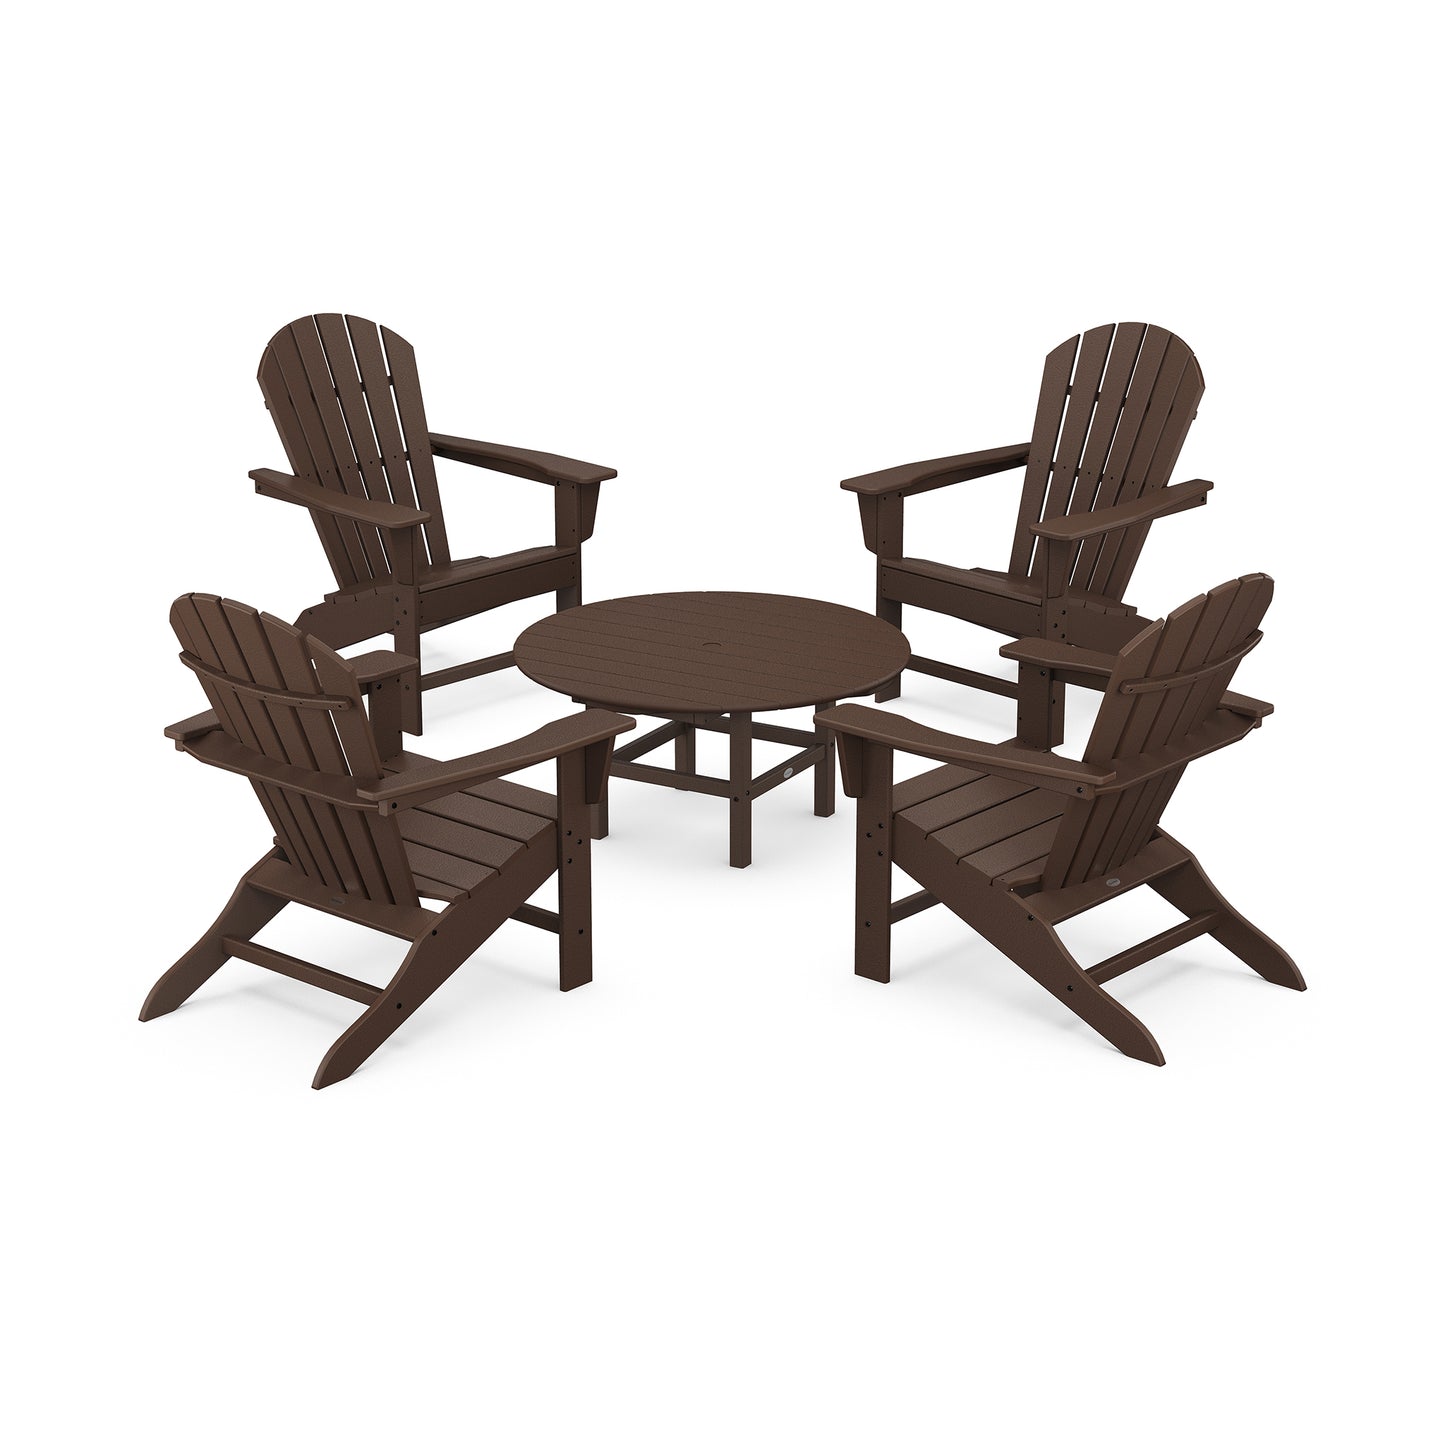 A set of four brown POLYWOOD South Beach Adirondack-style chairs arranged around a small matching circular table, displayed on a plain white background.